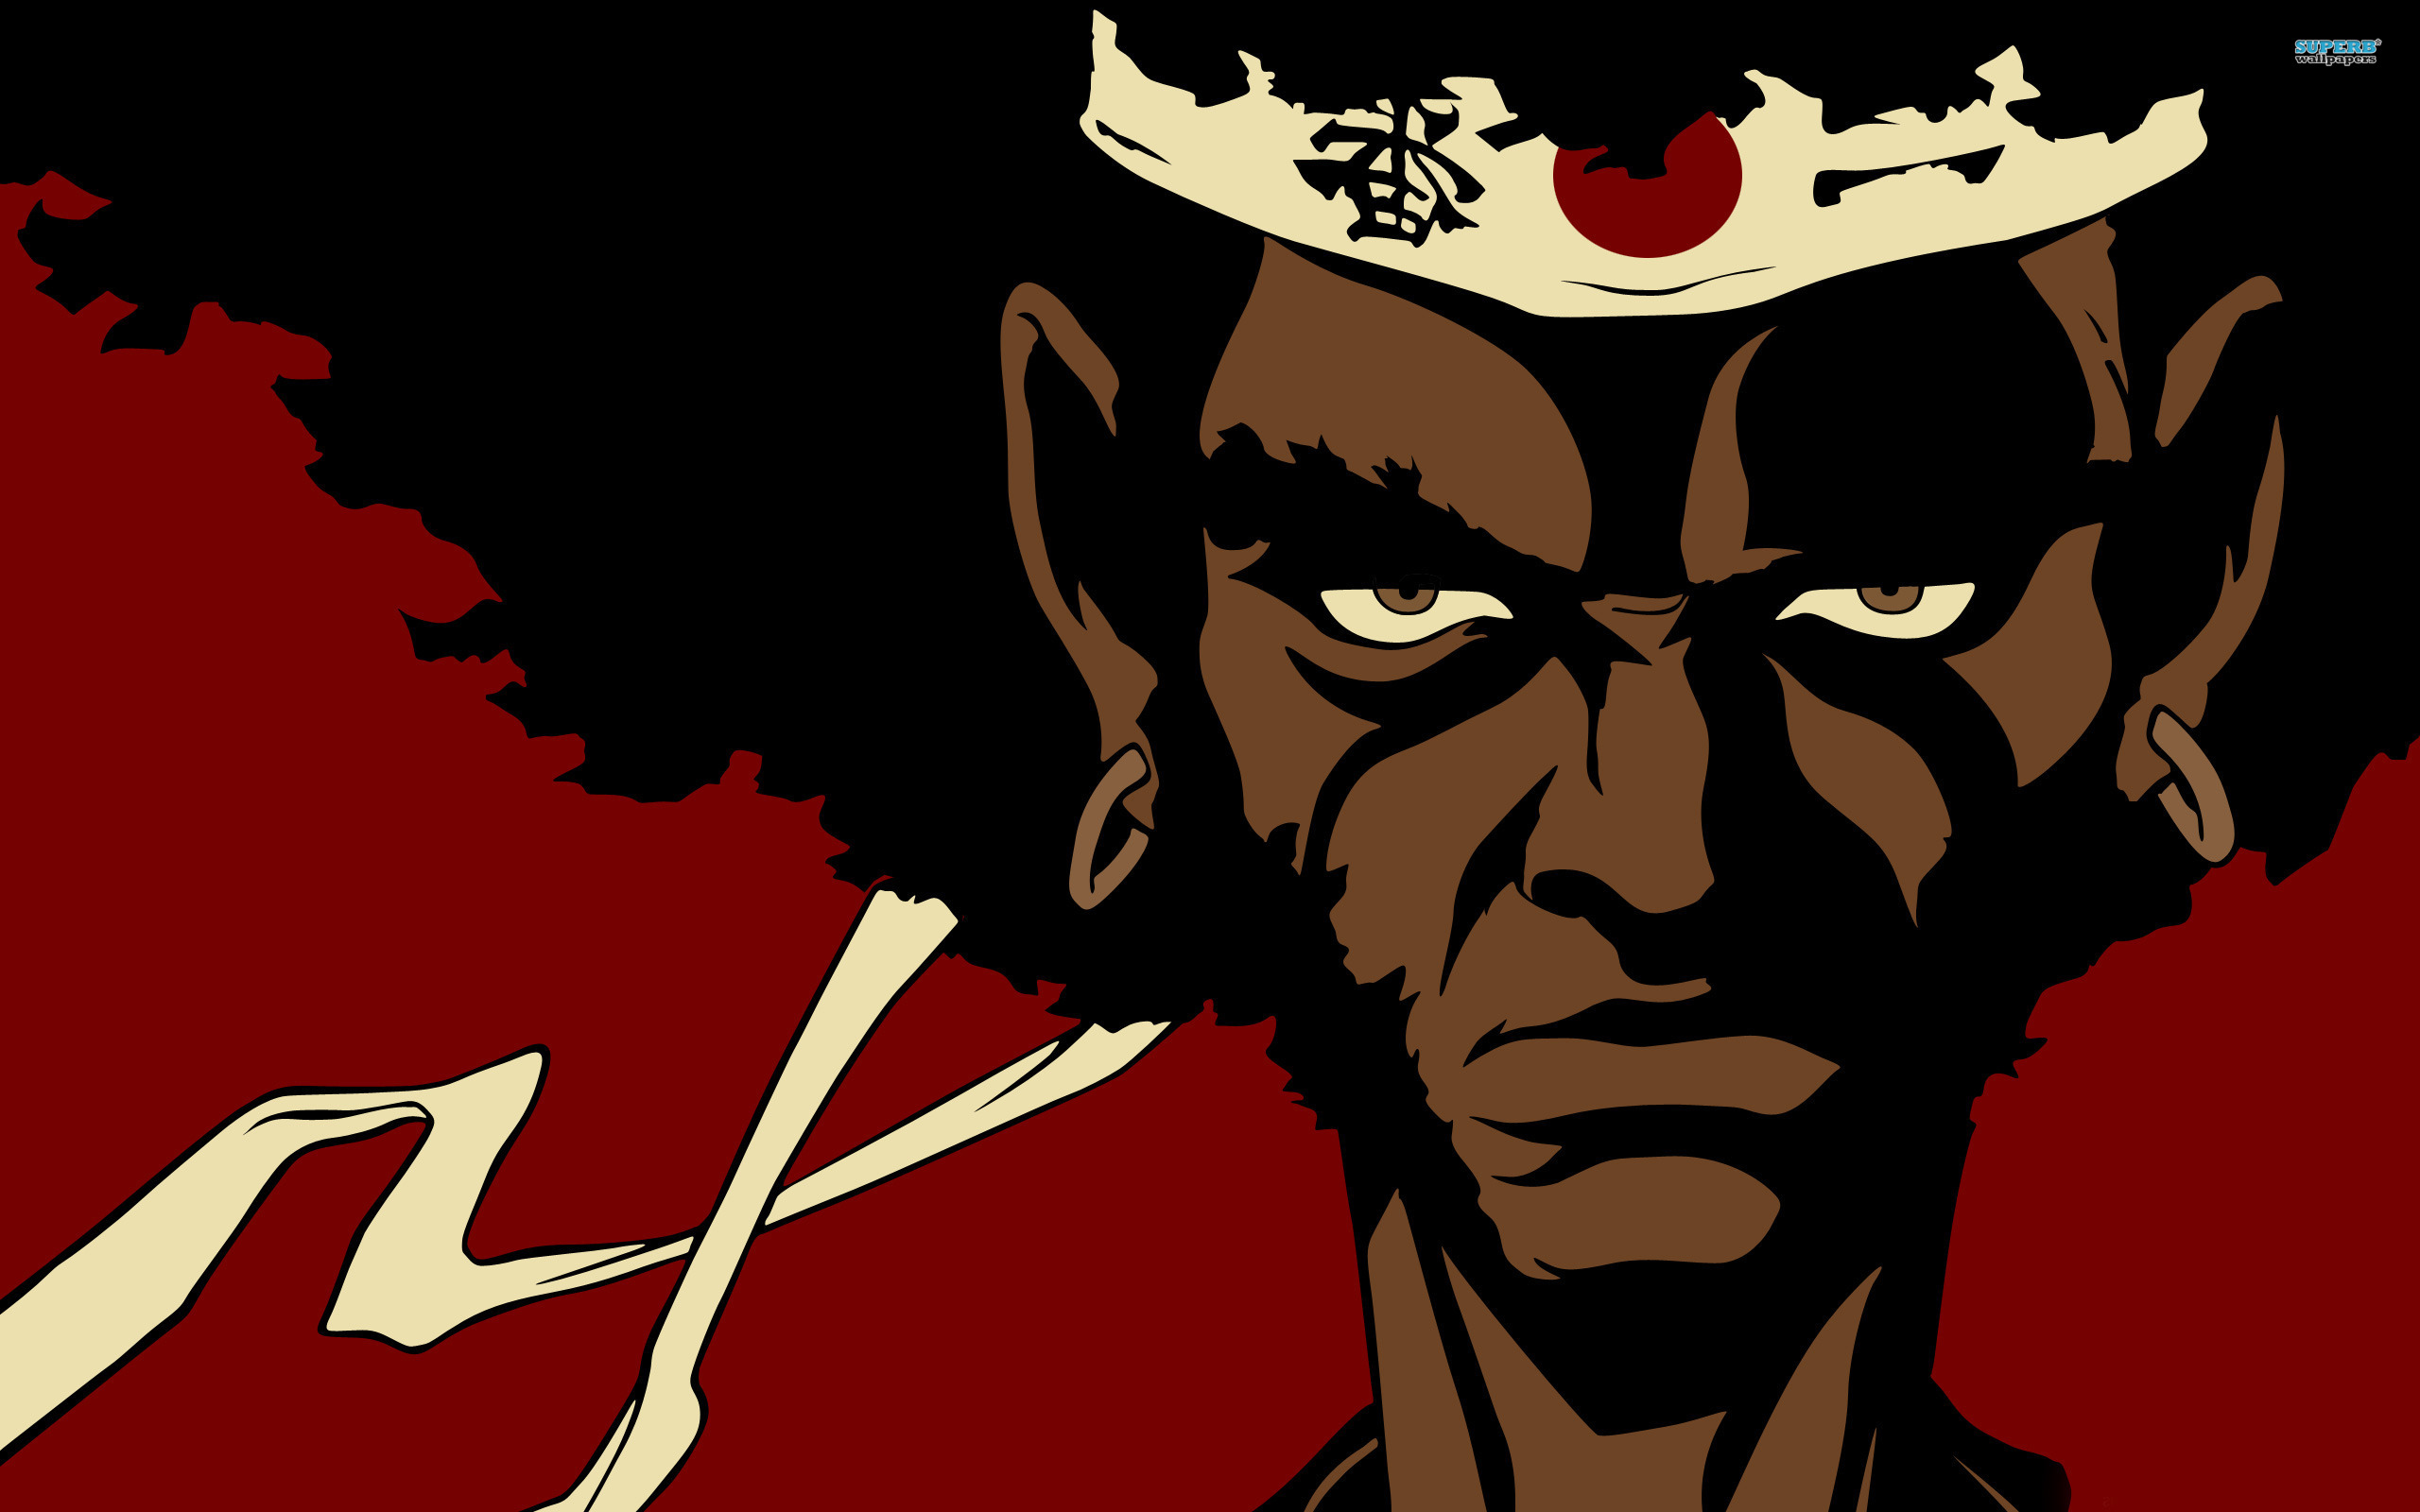 Is this the Best Anime Ever? Afro Samurai Season 1 Episode 1